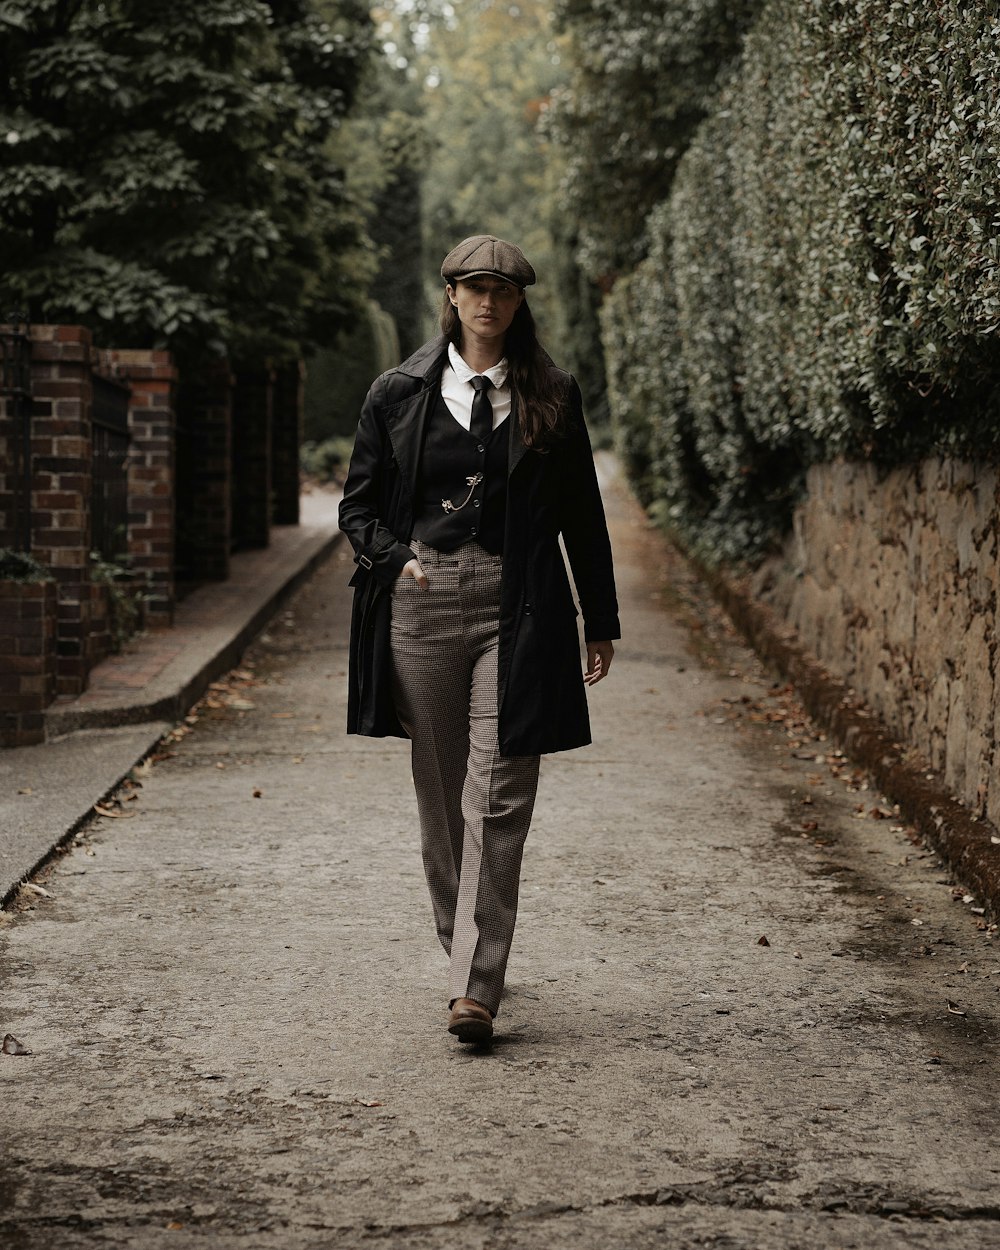 a woman walking down a street in a suit and tie